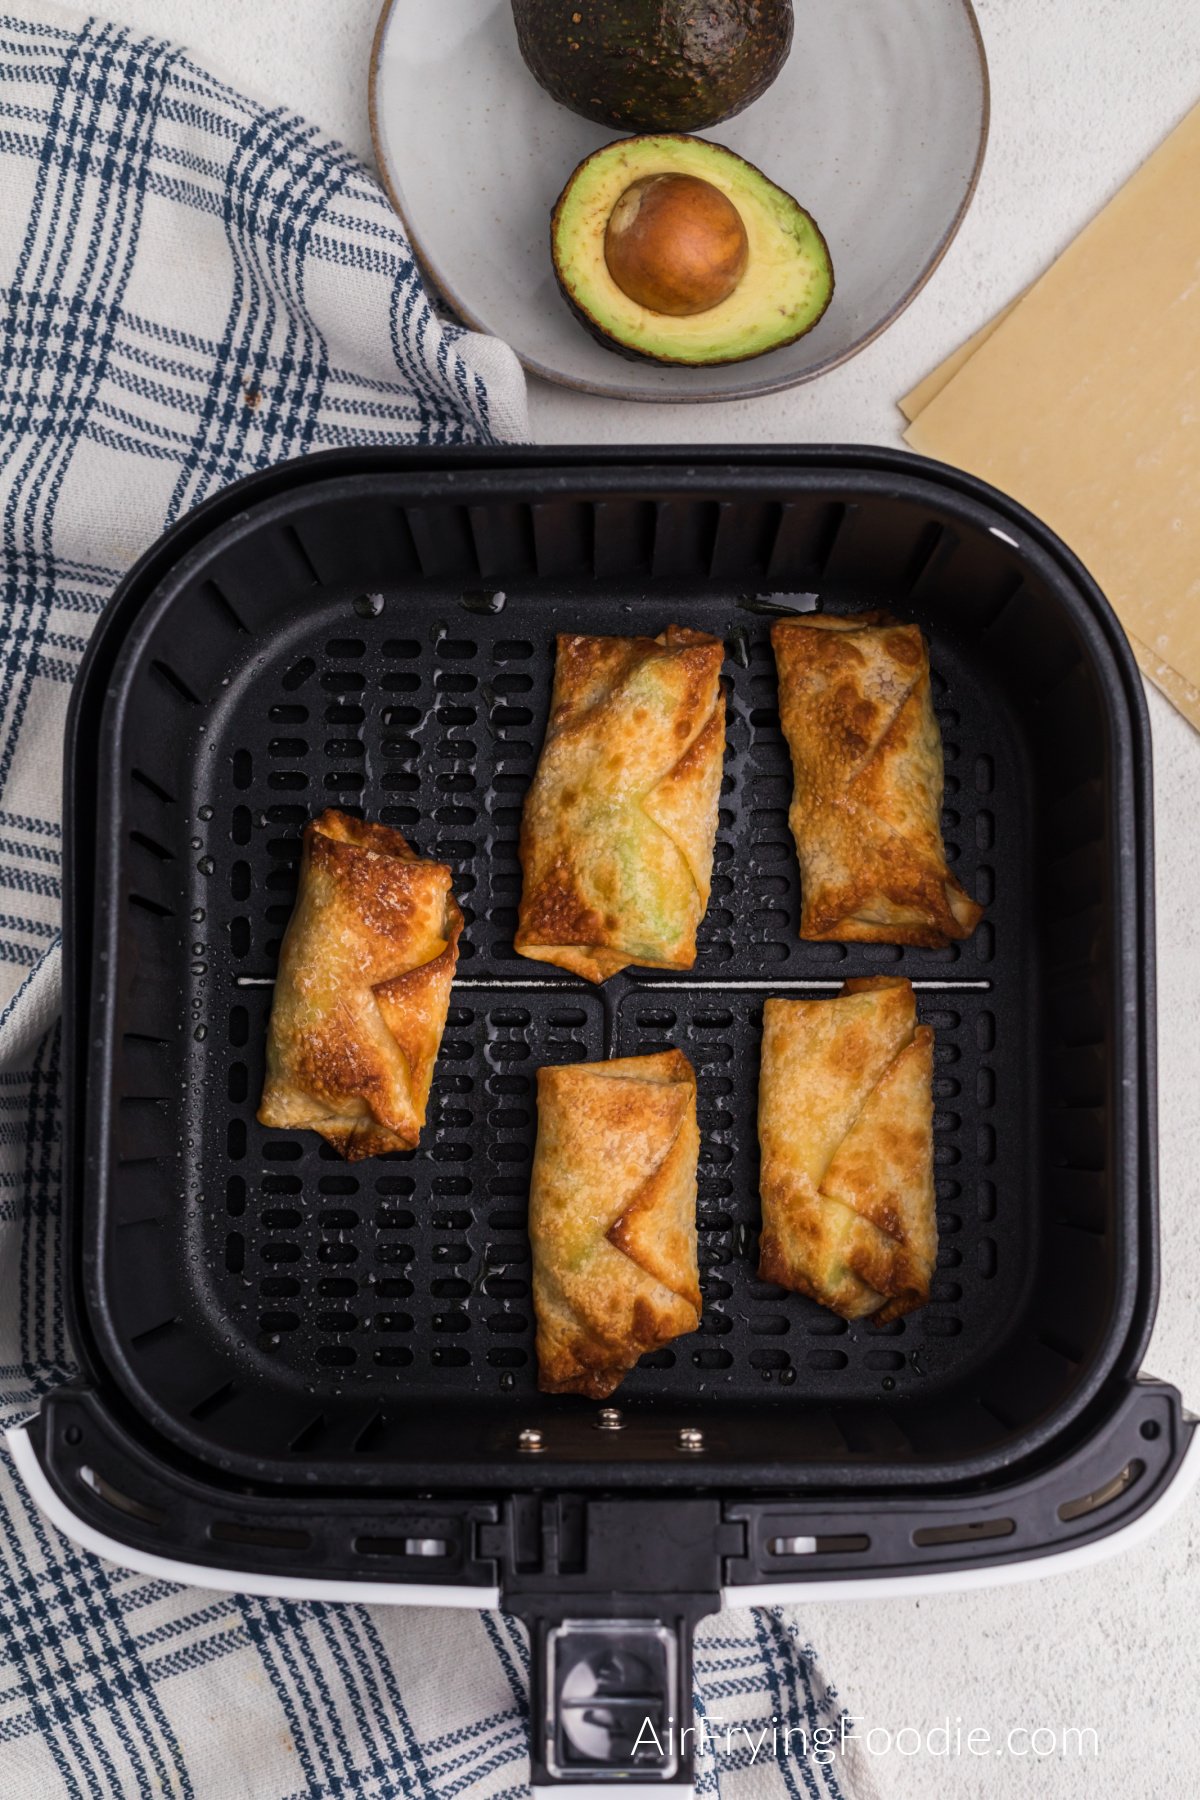 Avocado Bacon egg rolls in the basket of the air fryer.